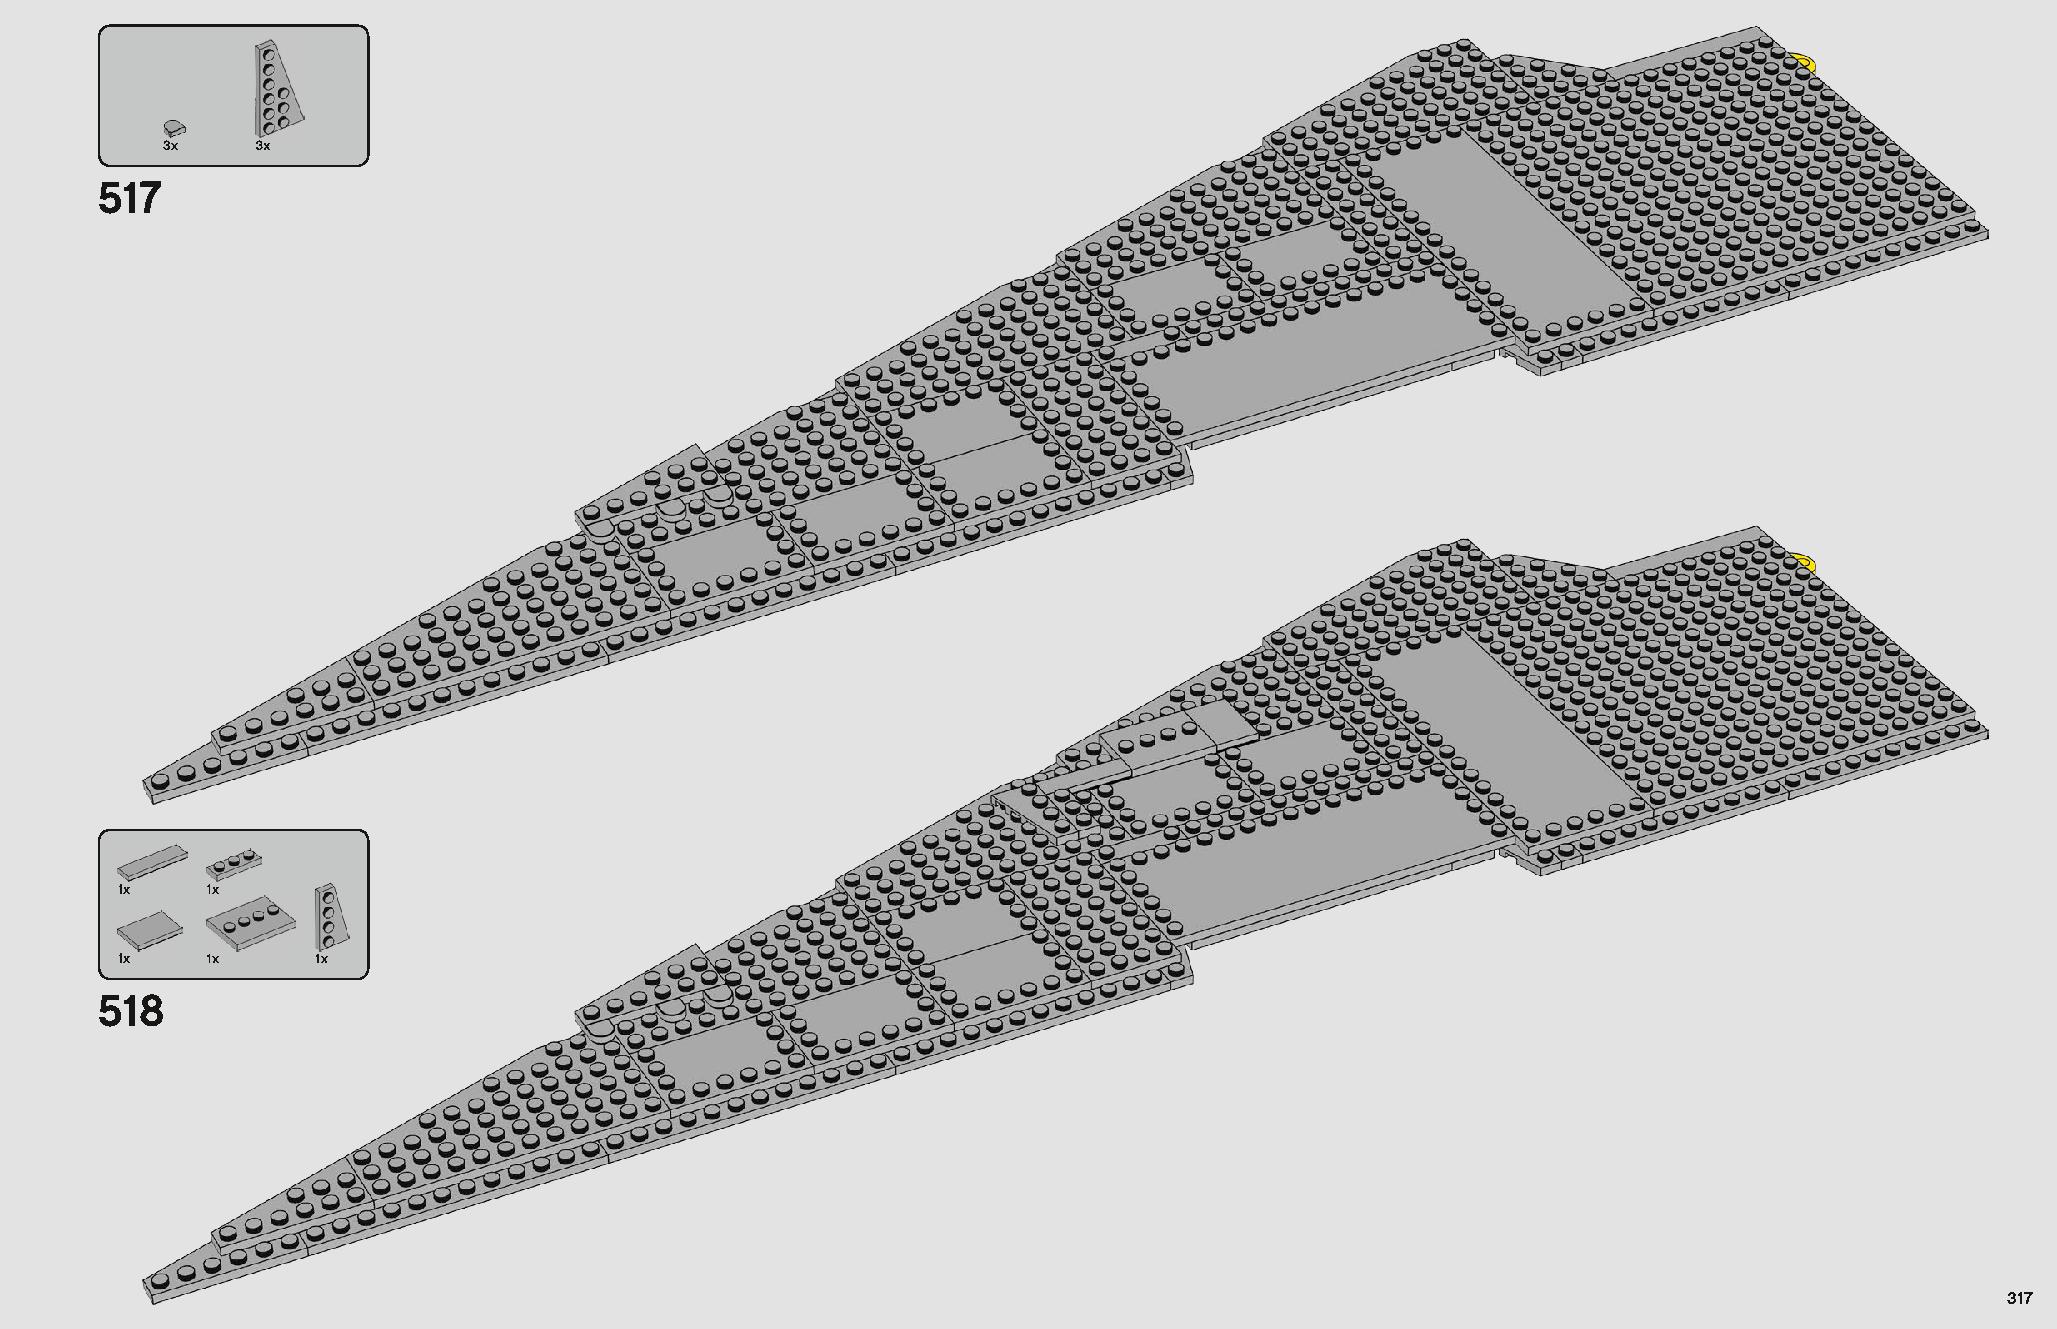 Imperial Star Destroyer 75252 LEGO information LEGO instructions 317 page